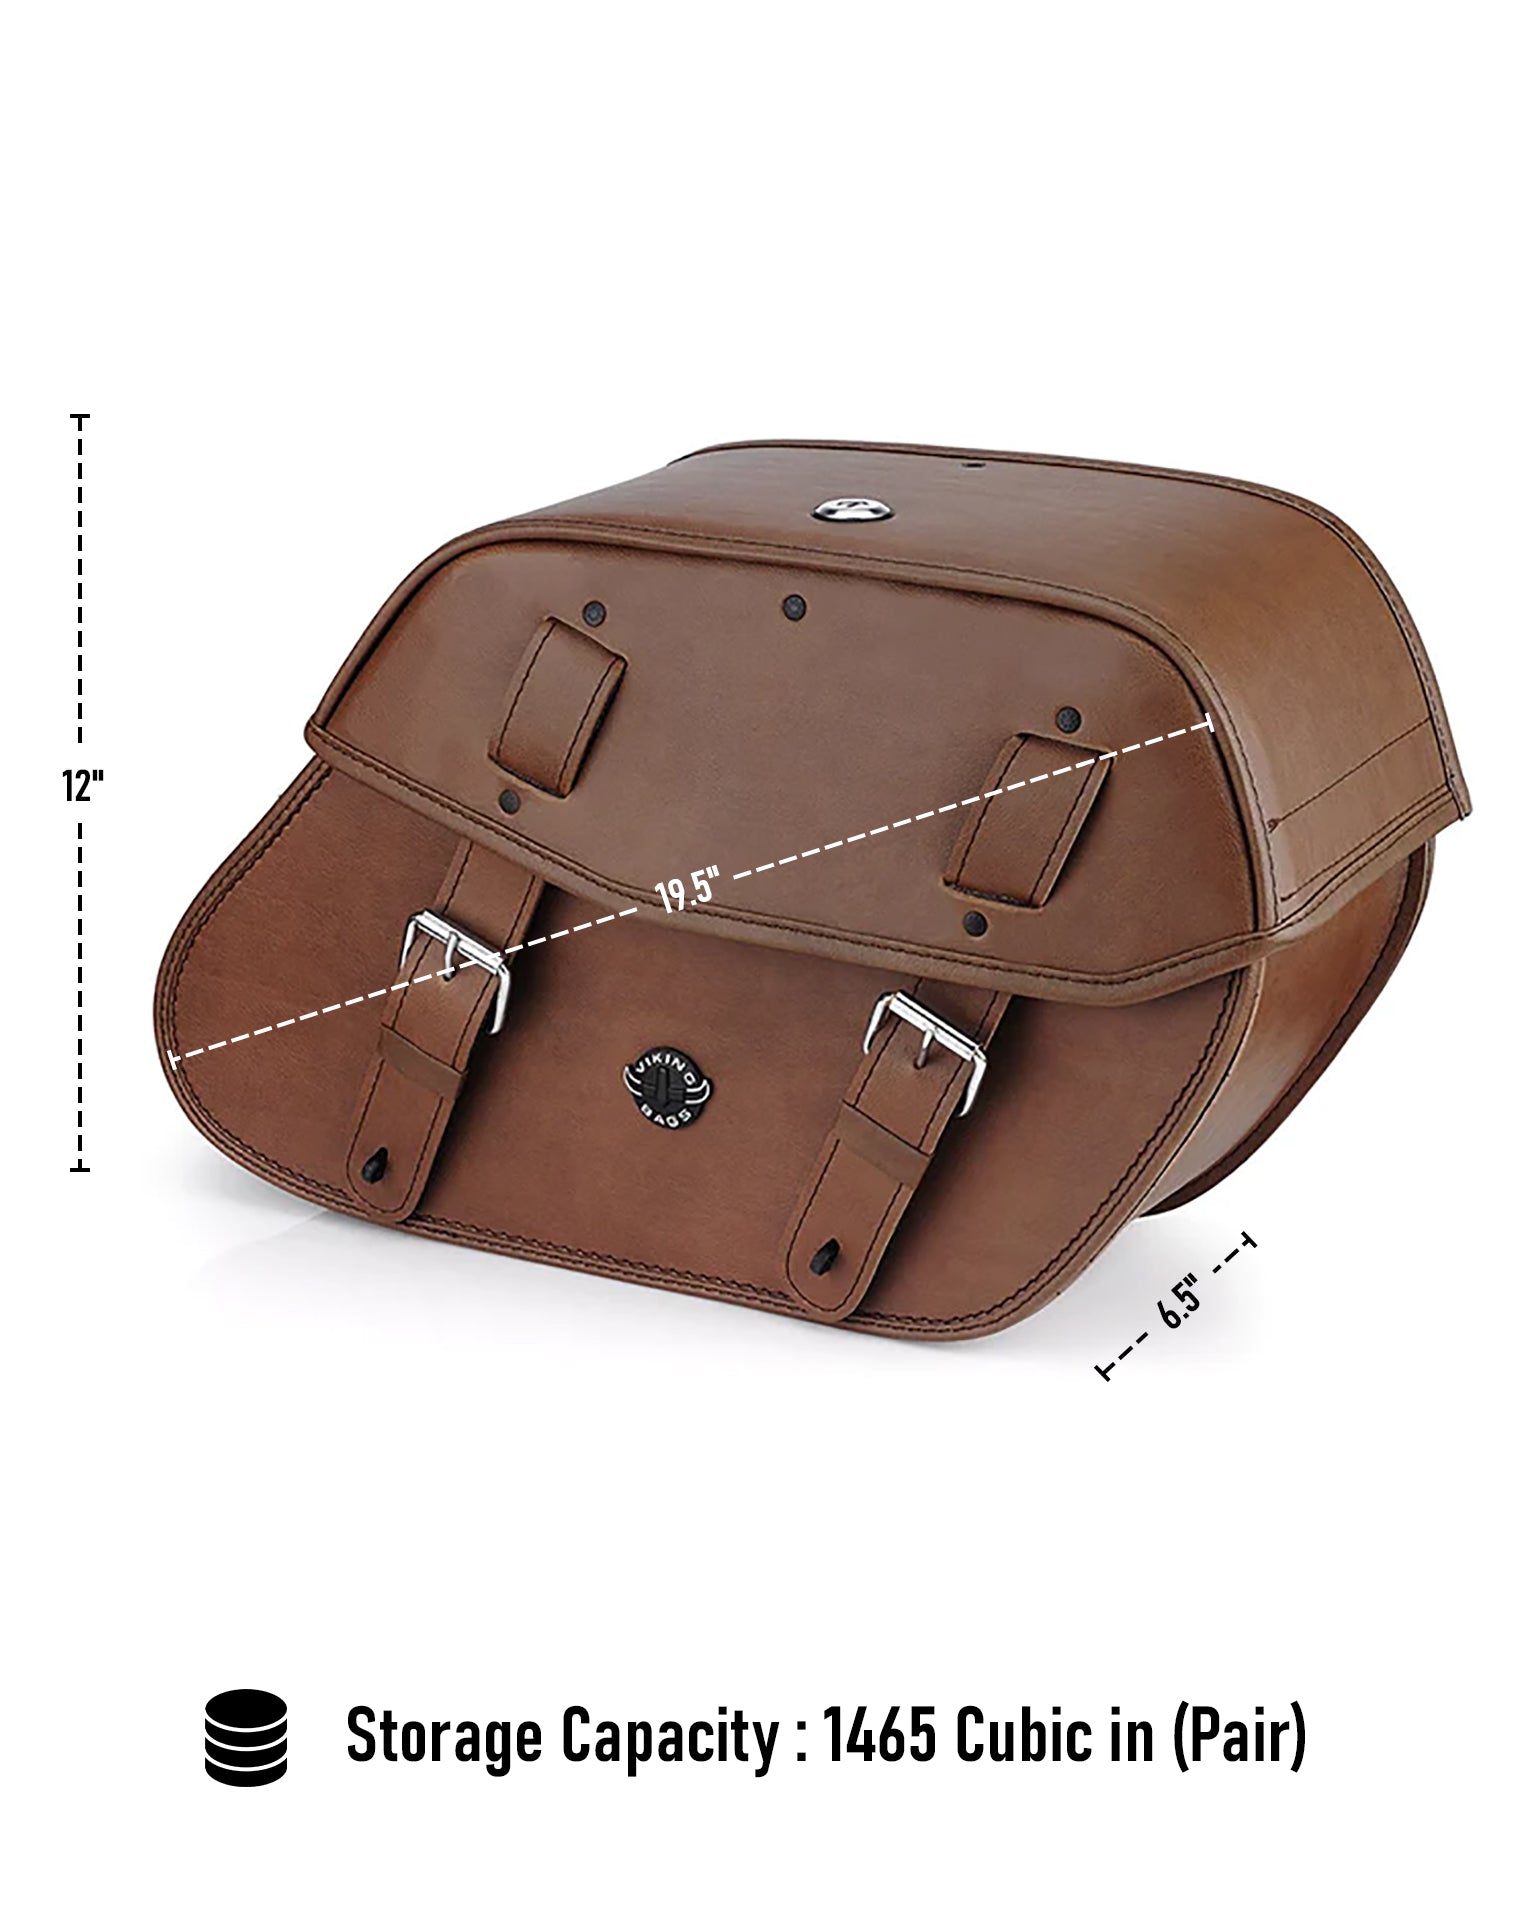 Viking Odin Brown Large Honda Vtx 1300 R Retro Leather Motorcycle Saddlebags Can Store Your Ridings Gears